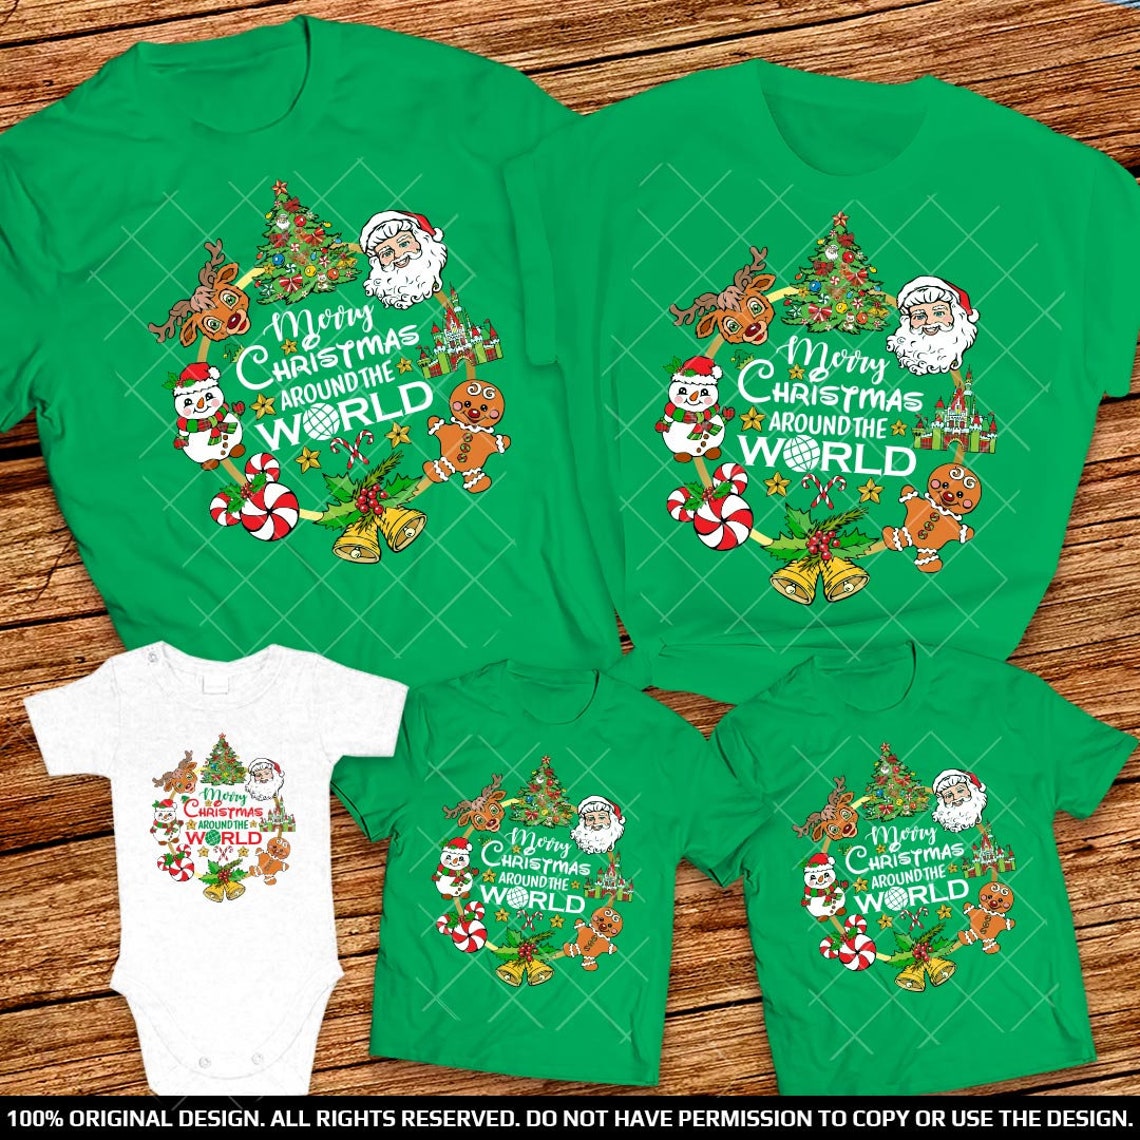 Epcot International Festival of the Holidays 2022 family shirts, Very Merry Christmas Party, Merry Christmas around the World Epcot shirts